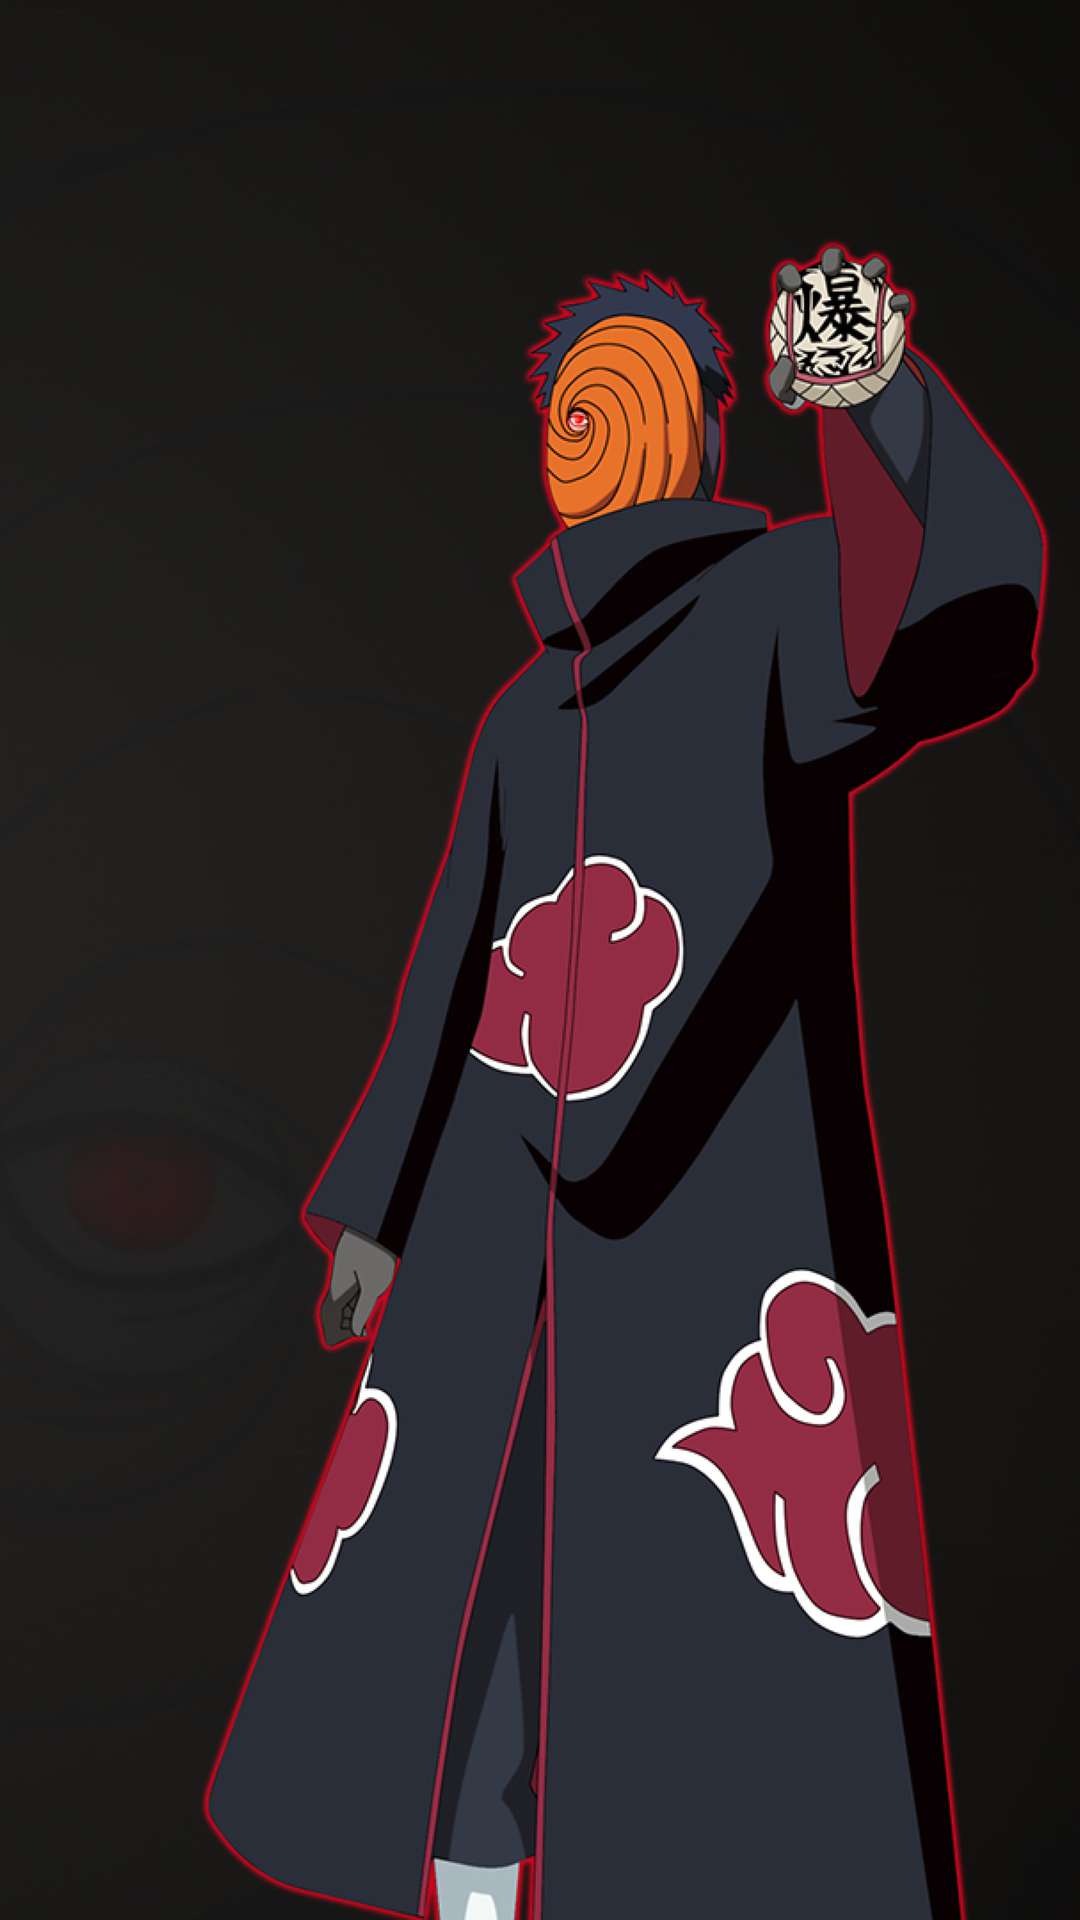 4k Obito Uchiha wallpaper Desktop Android and iPhone  Page 4 of 7  The  RamenSwag